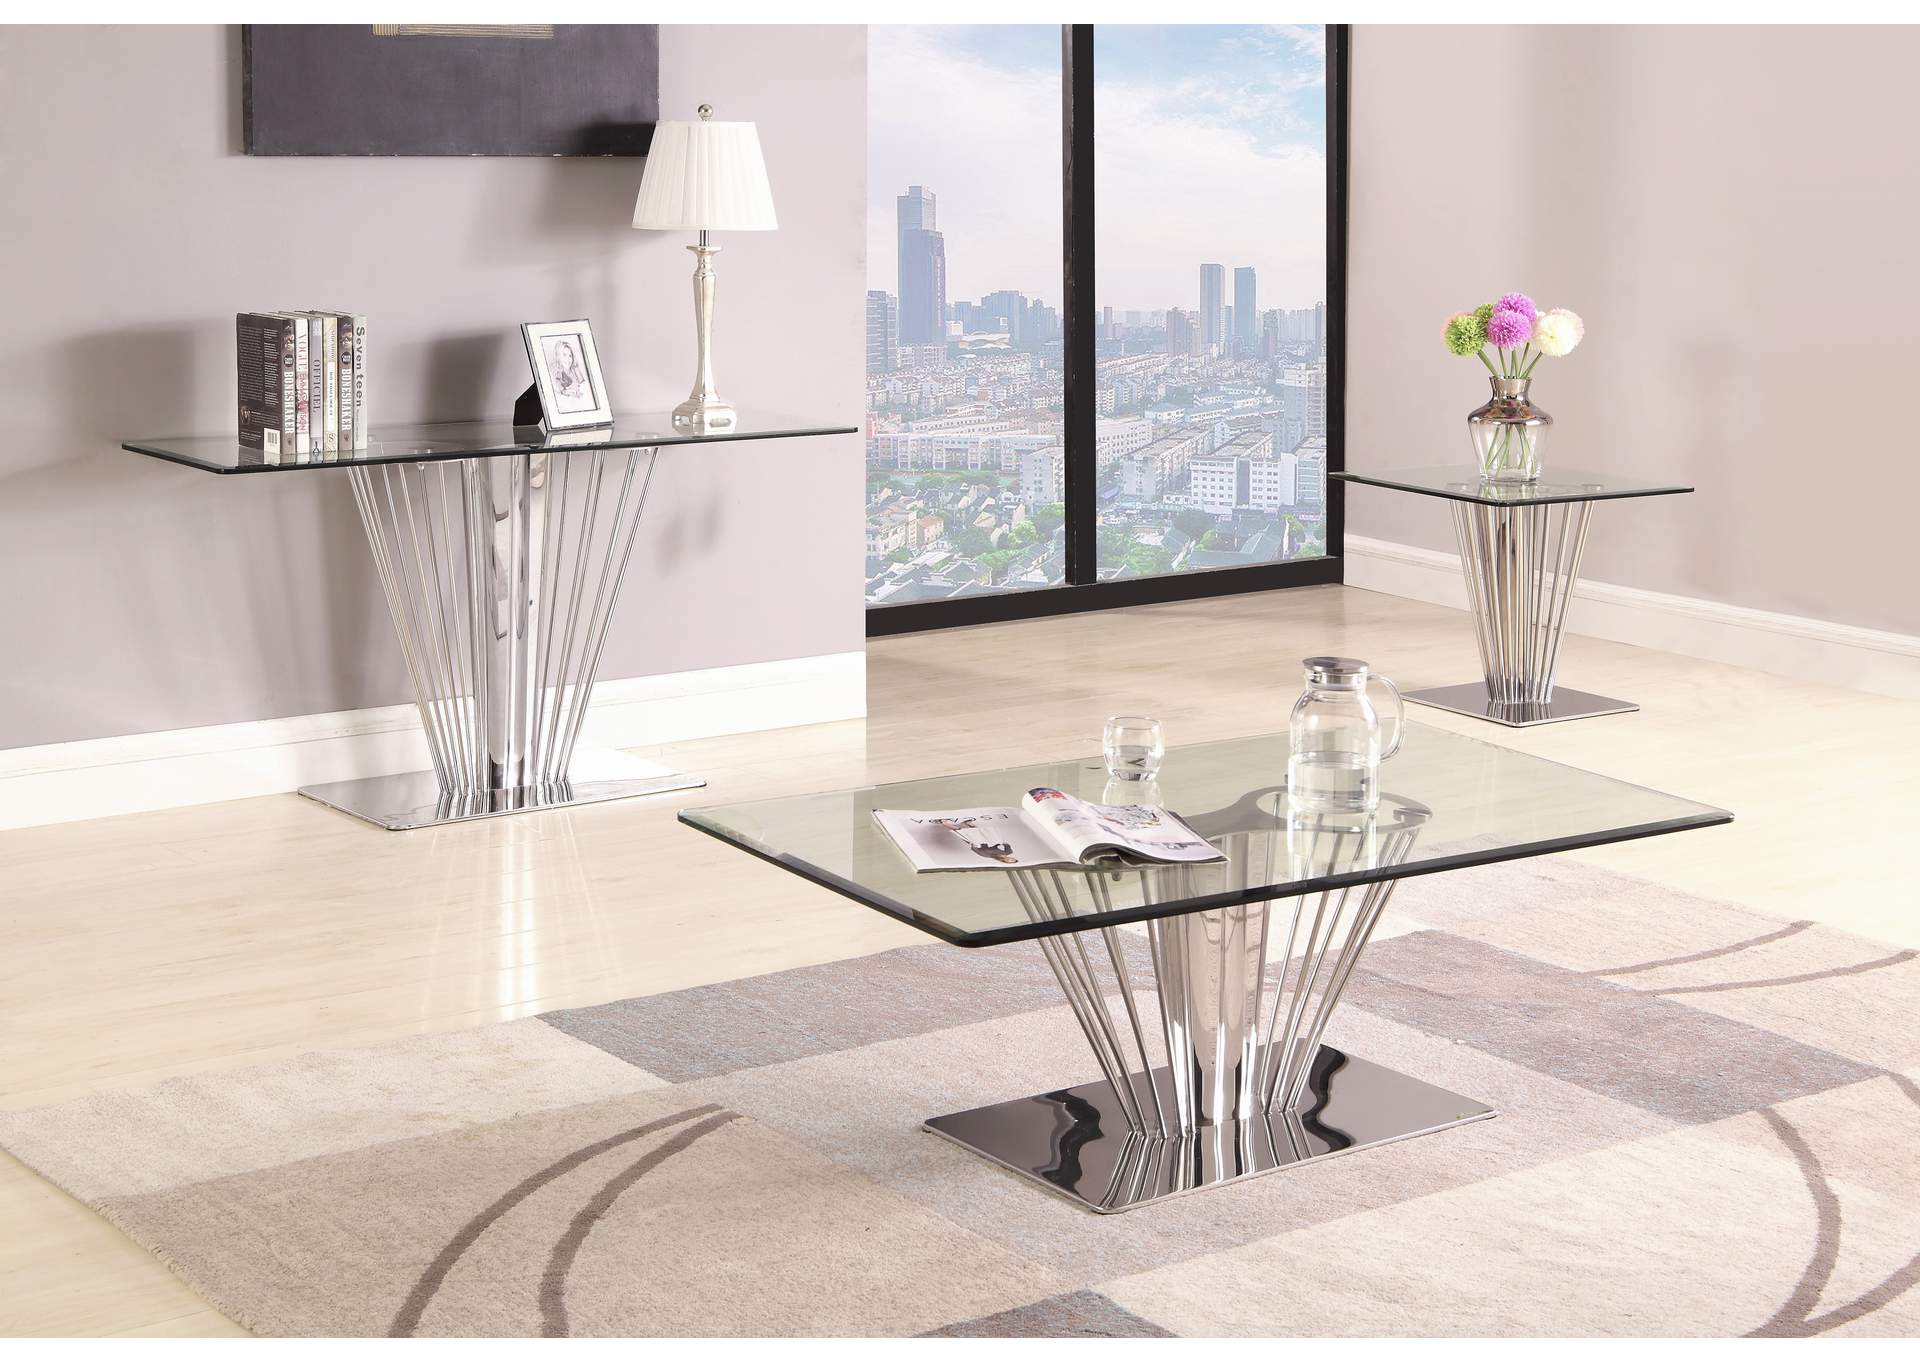 Contemporary Rectangular Glass Lamp Table,Chintaly Imports